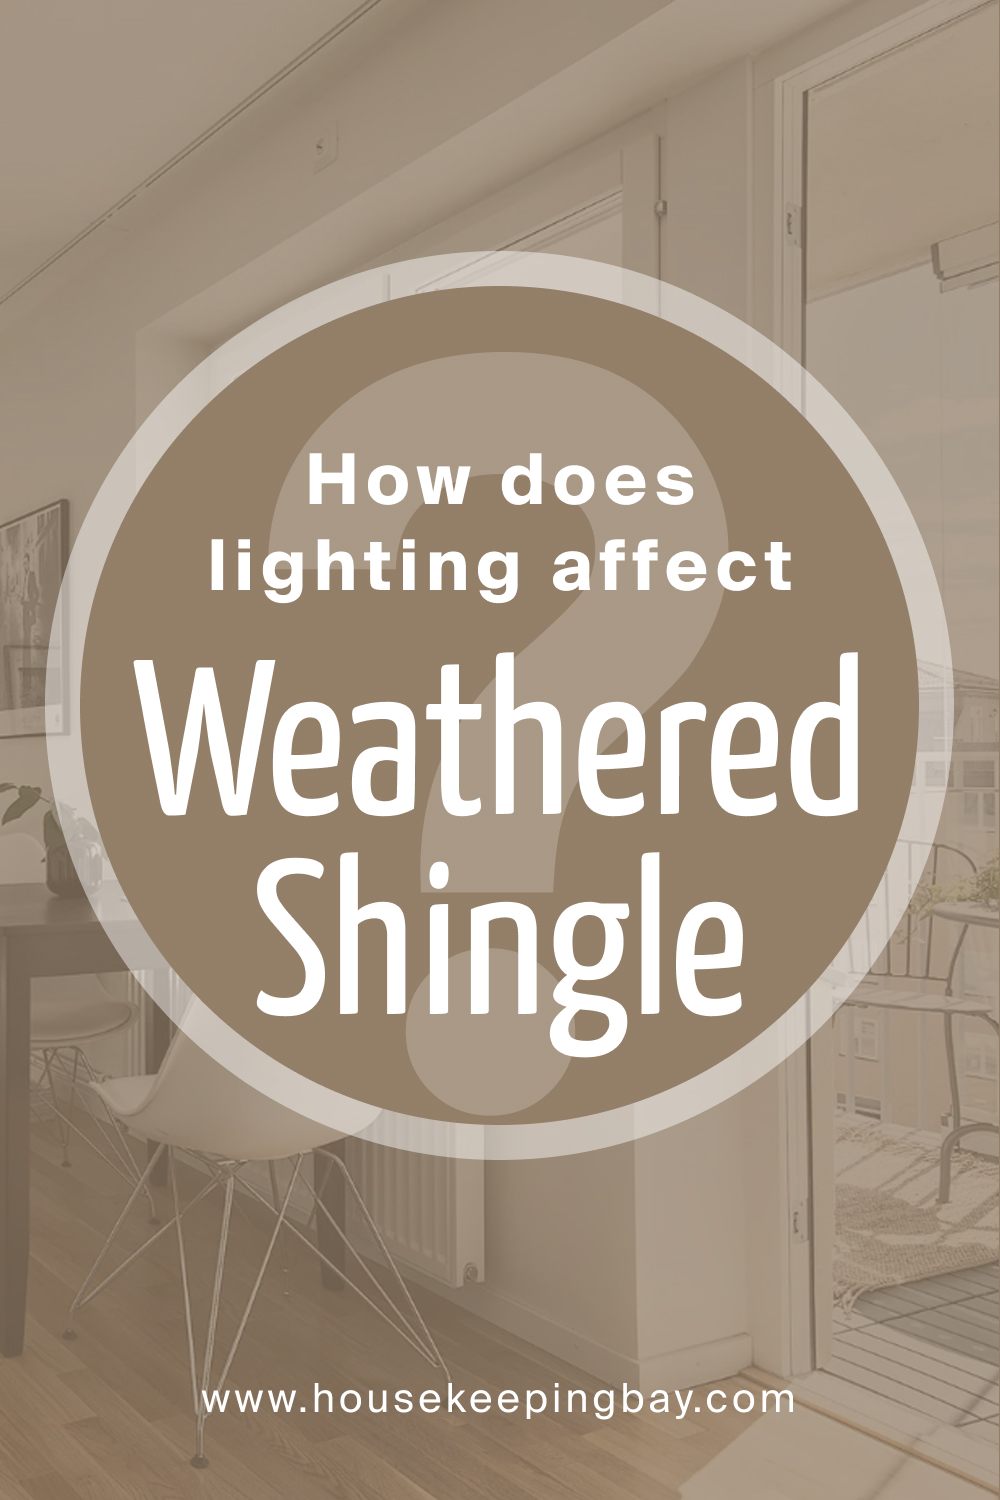 How does lighting affect SW 2841 Weathered Shingle